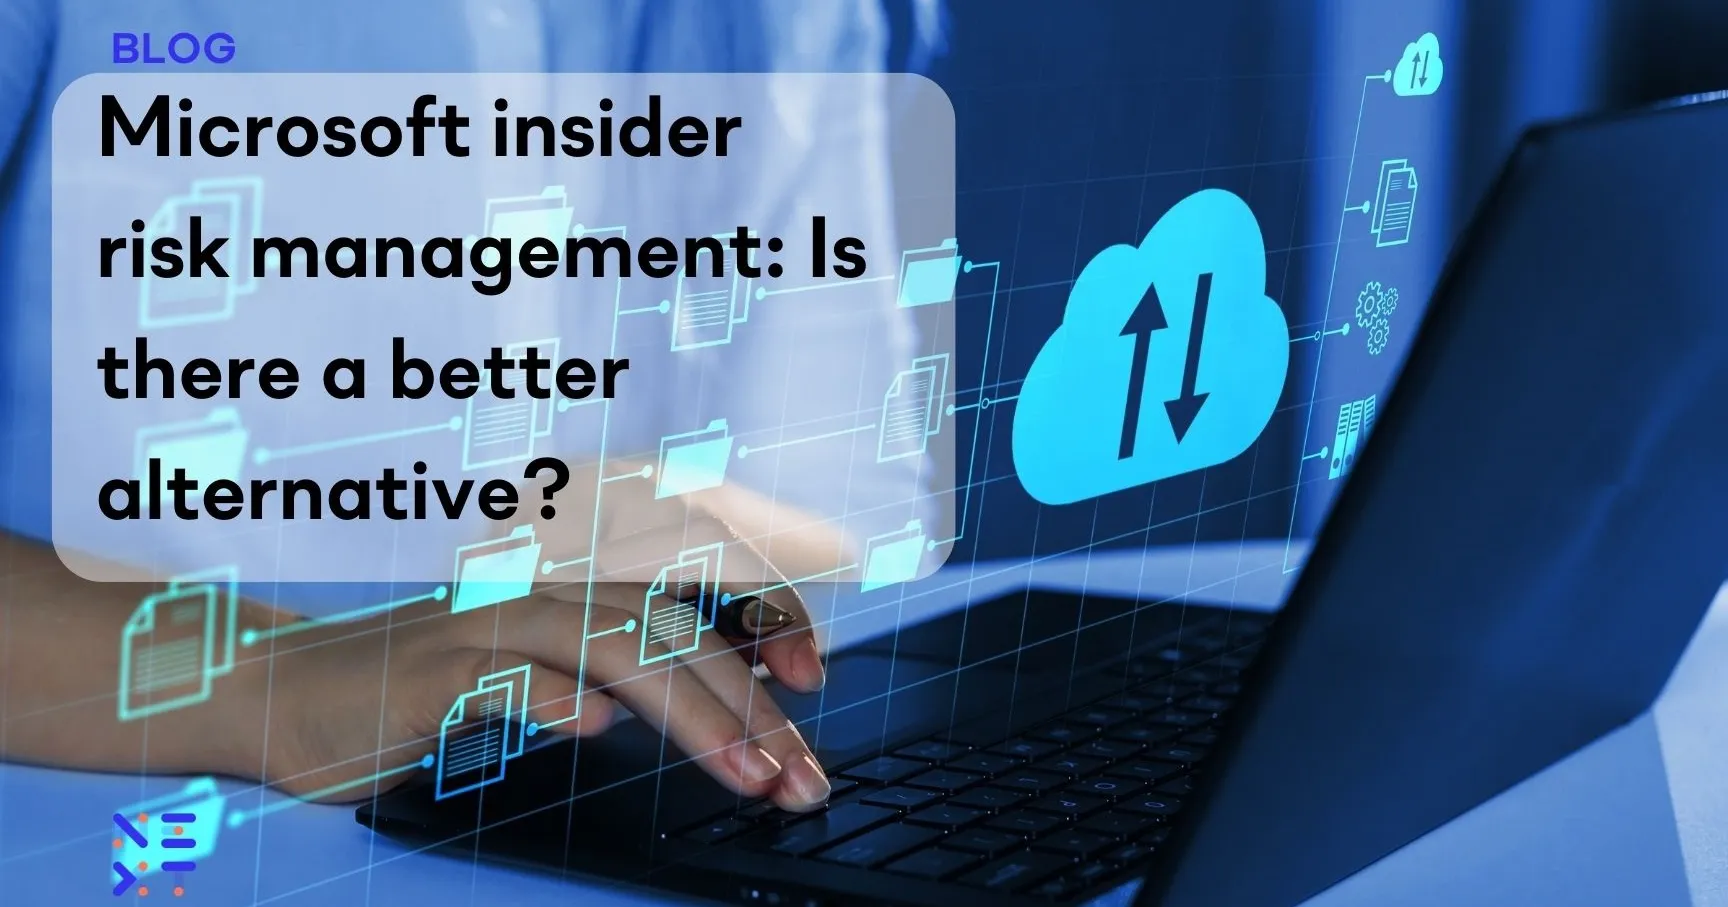 Microsoft insider risk management: Is there a better alternative?